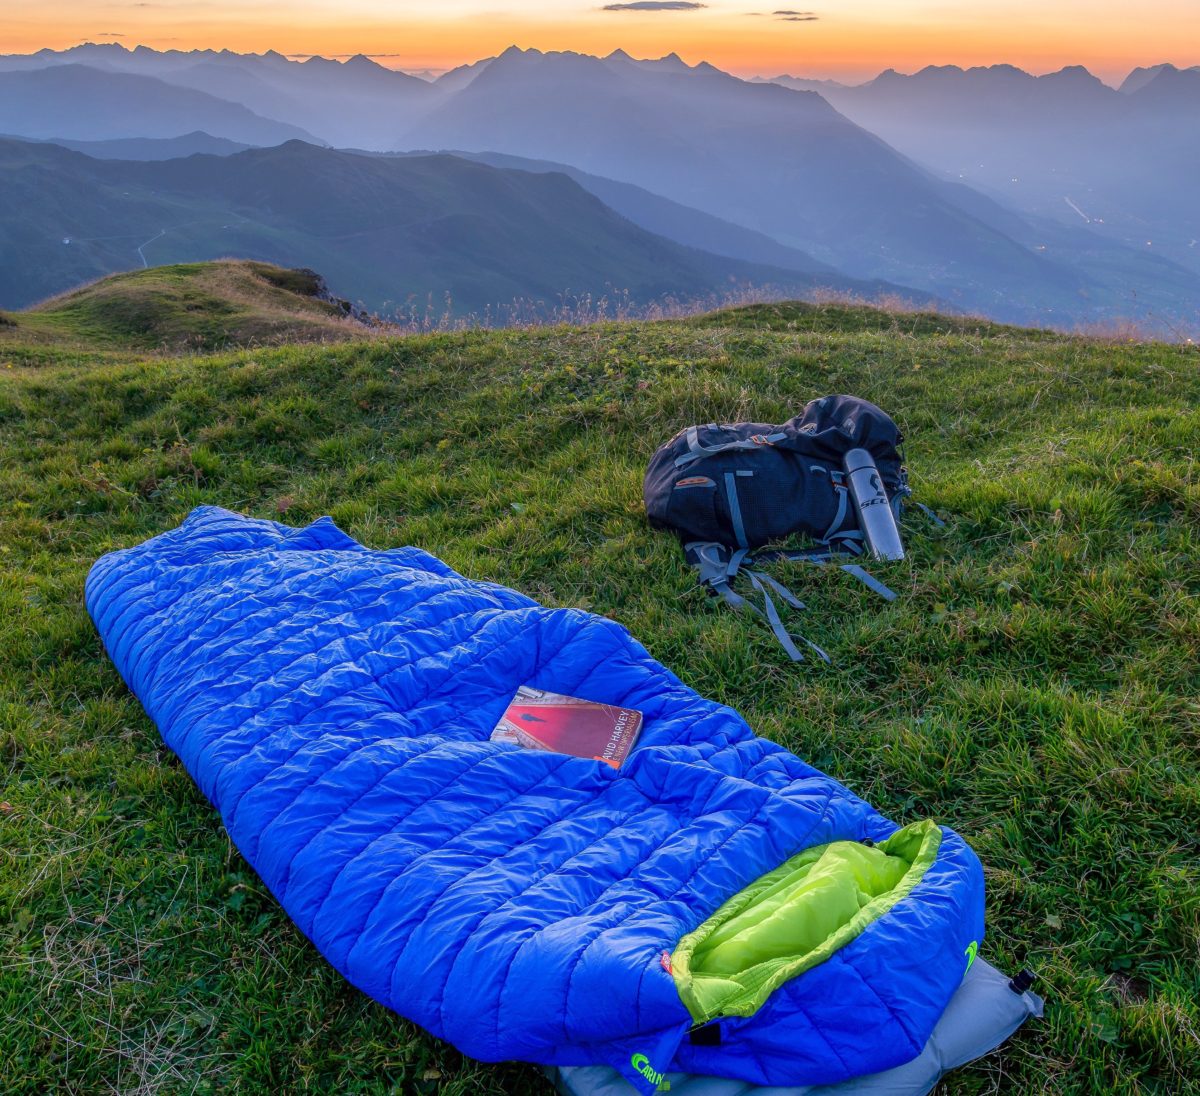 The 6 Best Sleeping Bags for Backpacking Under $100 in 2023